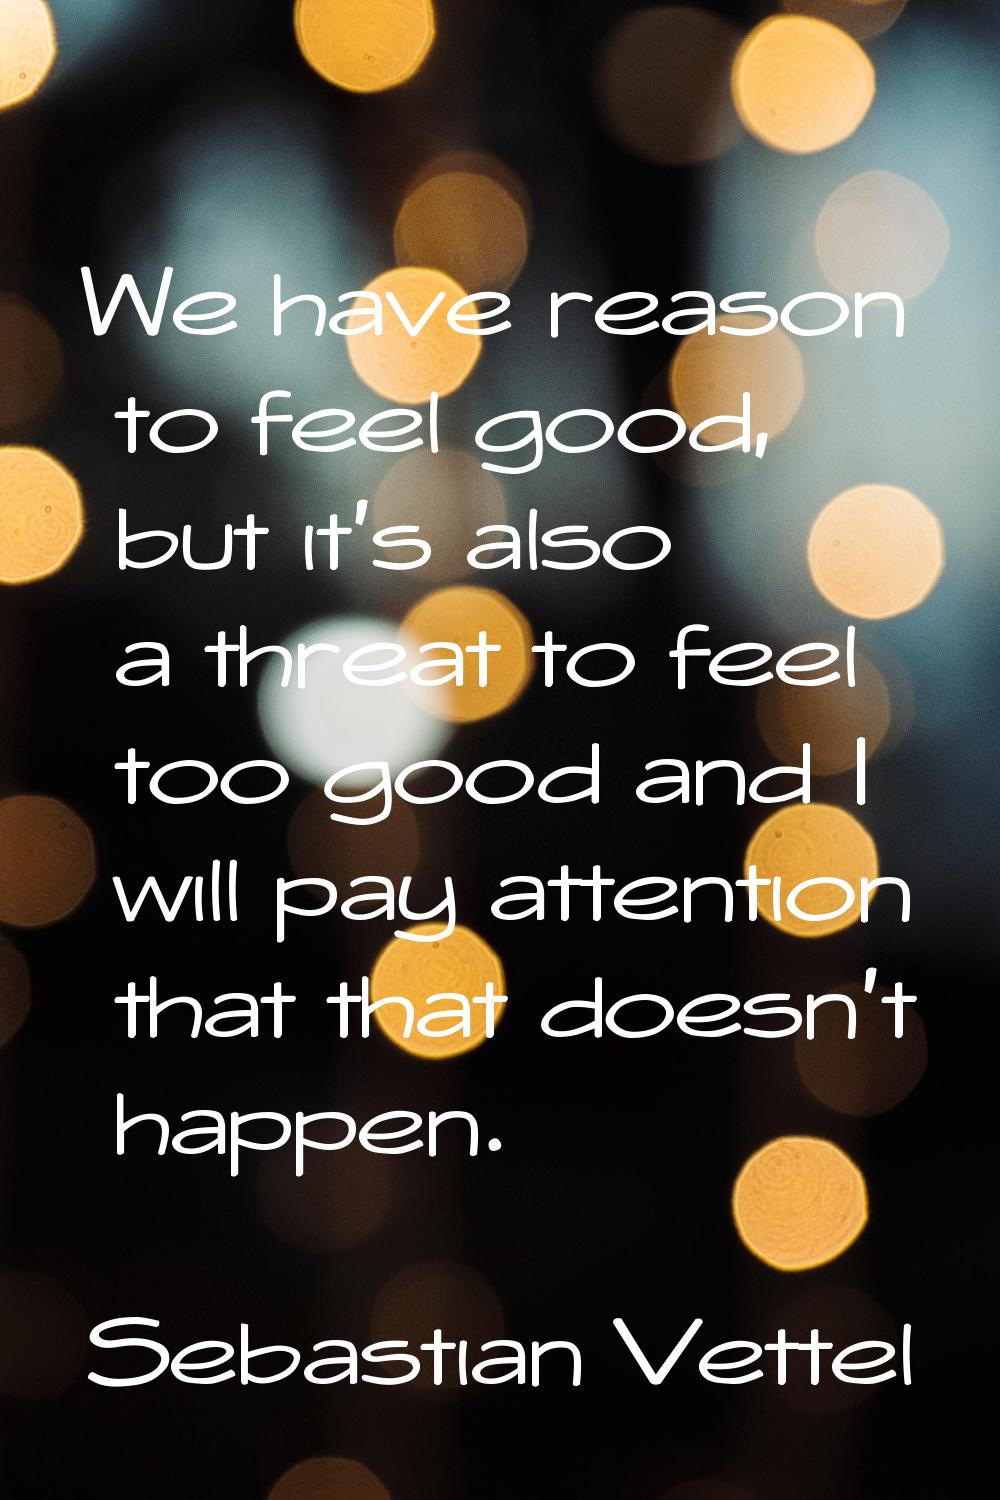 We have reason to feel good, but it's also a threat to feel too good and I will pay attention that 